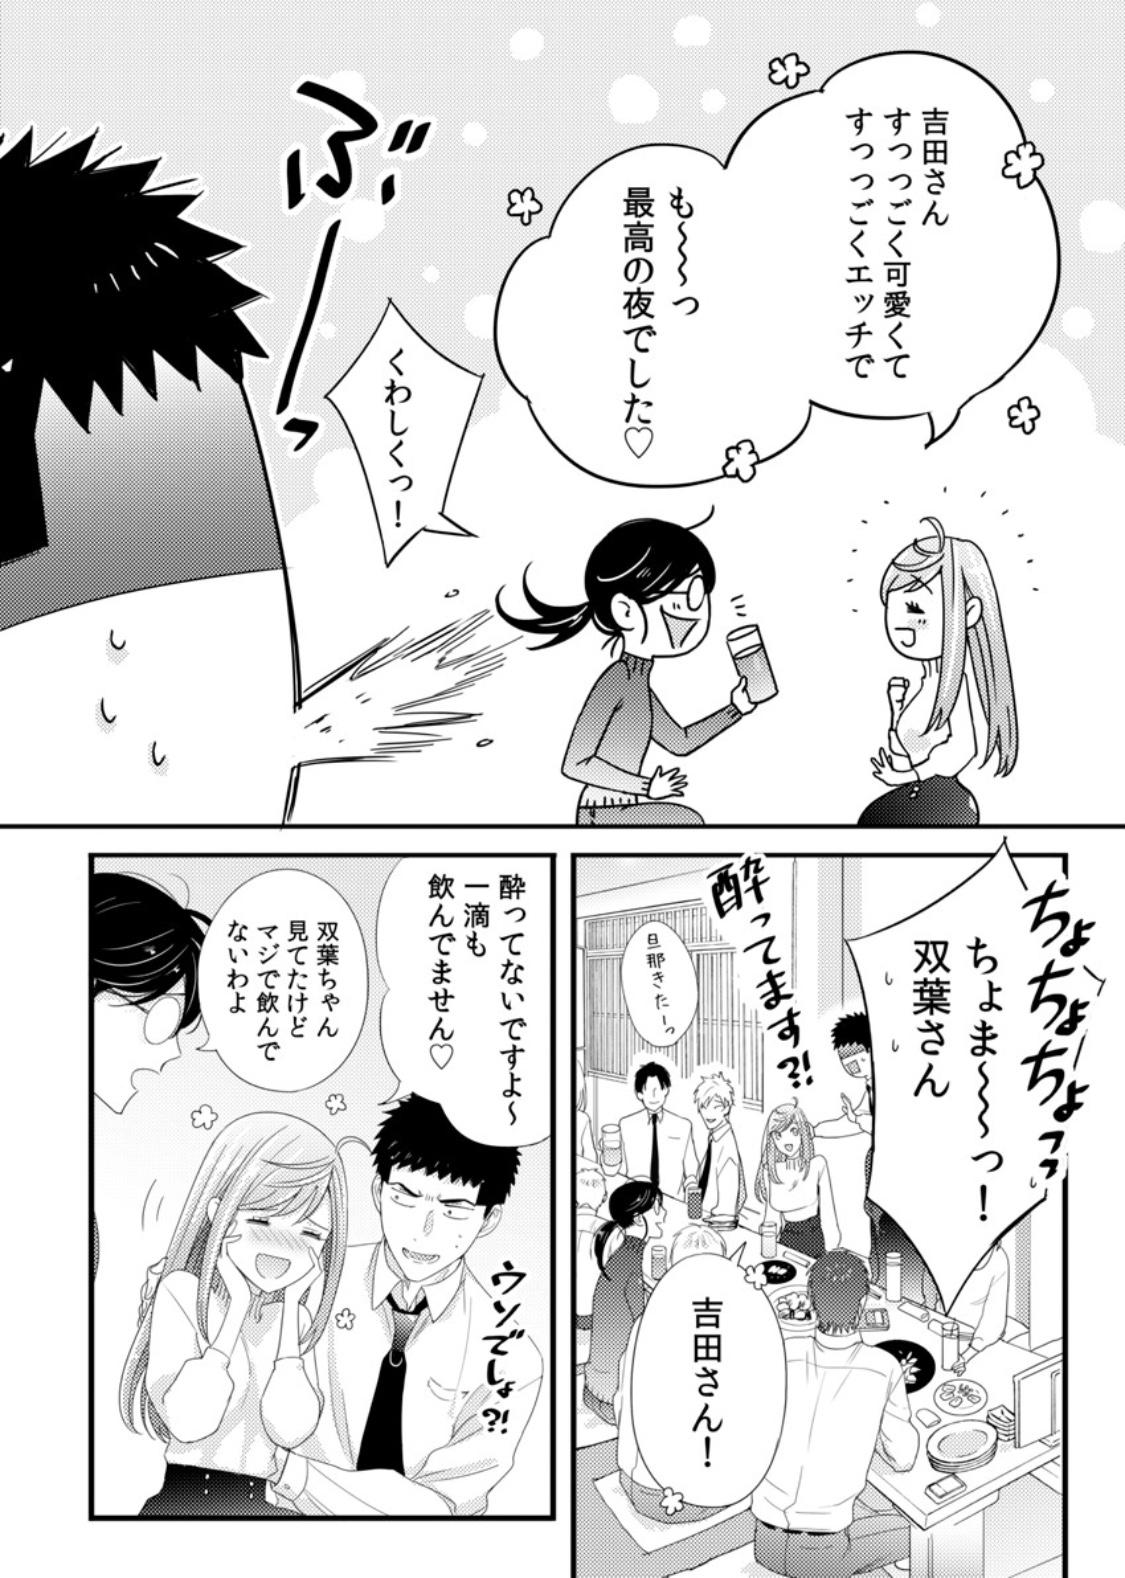 Please Let Me Hold You Futaba-San! Ch. 1-4 82